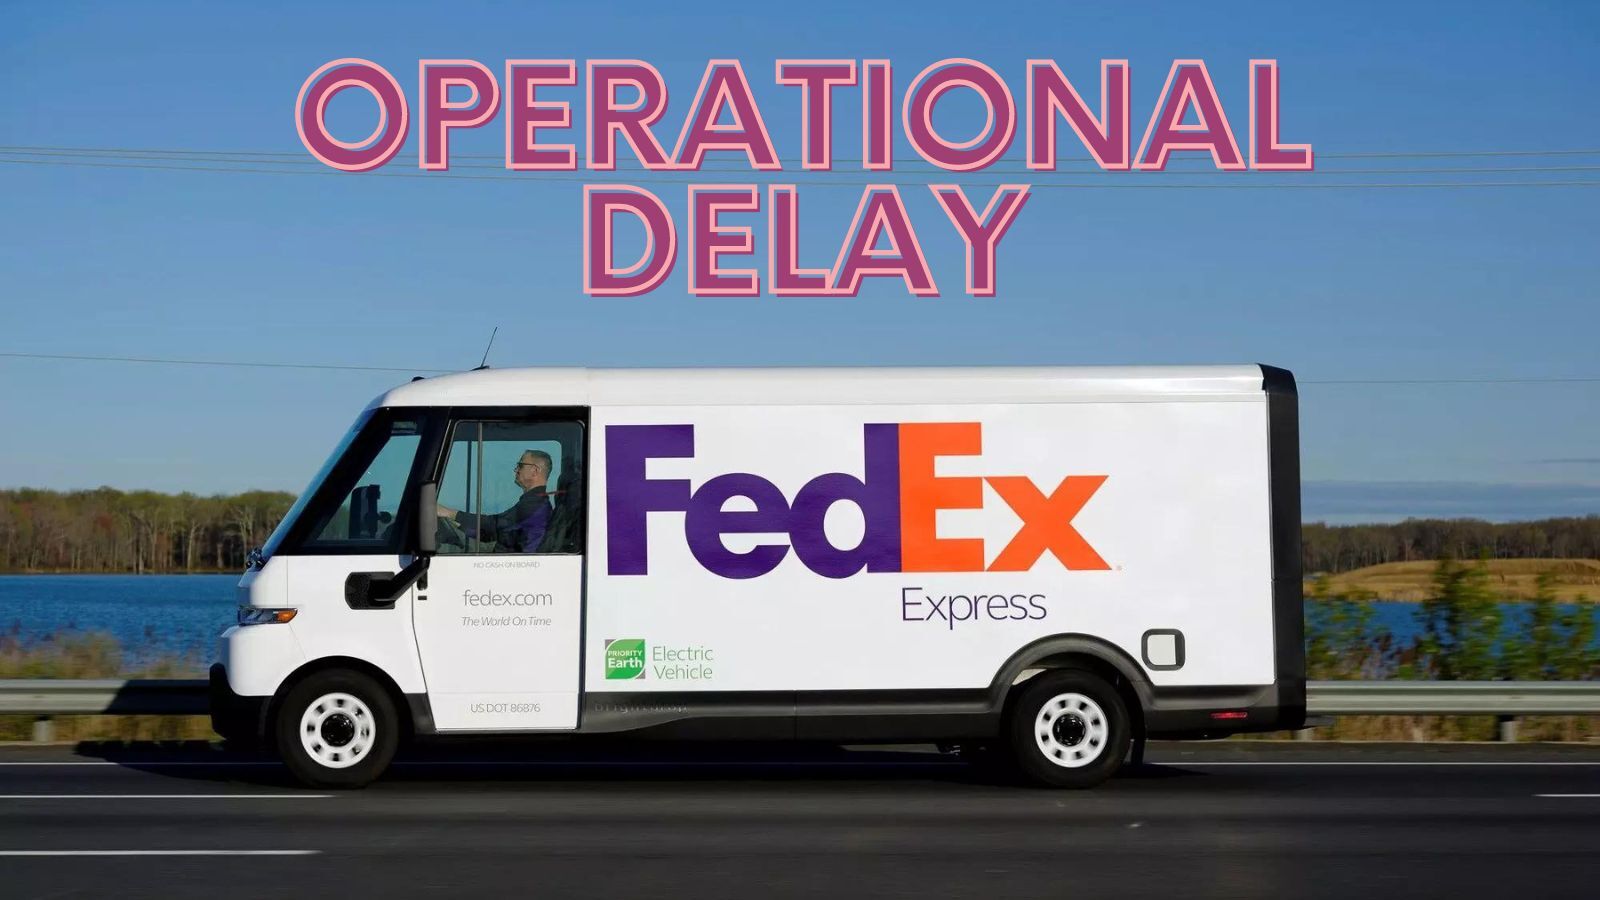 FedEx Operational Delay: Why, How to Deal, and Some Tips